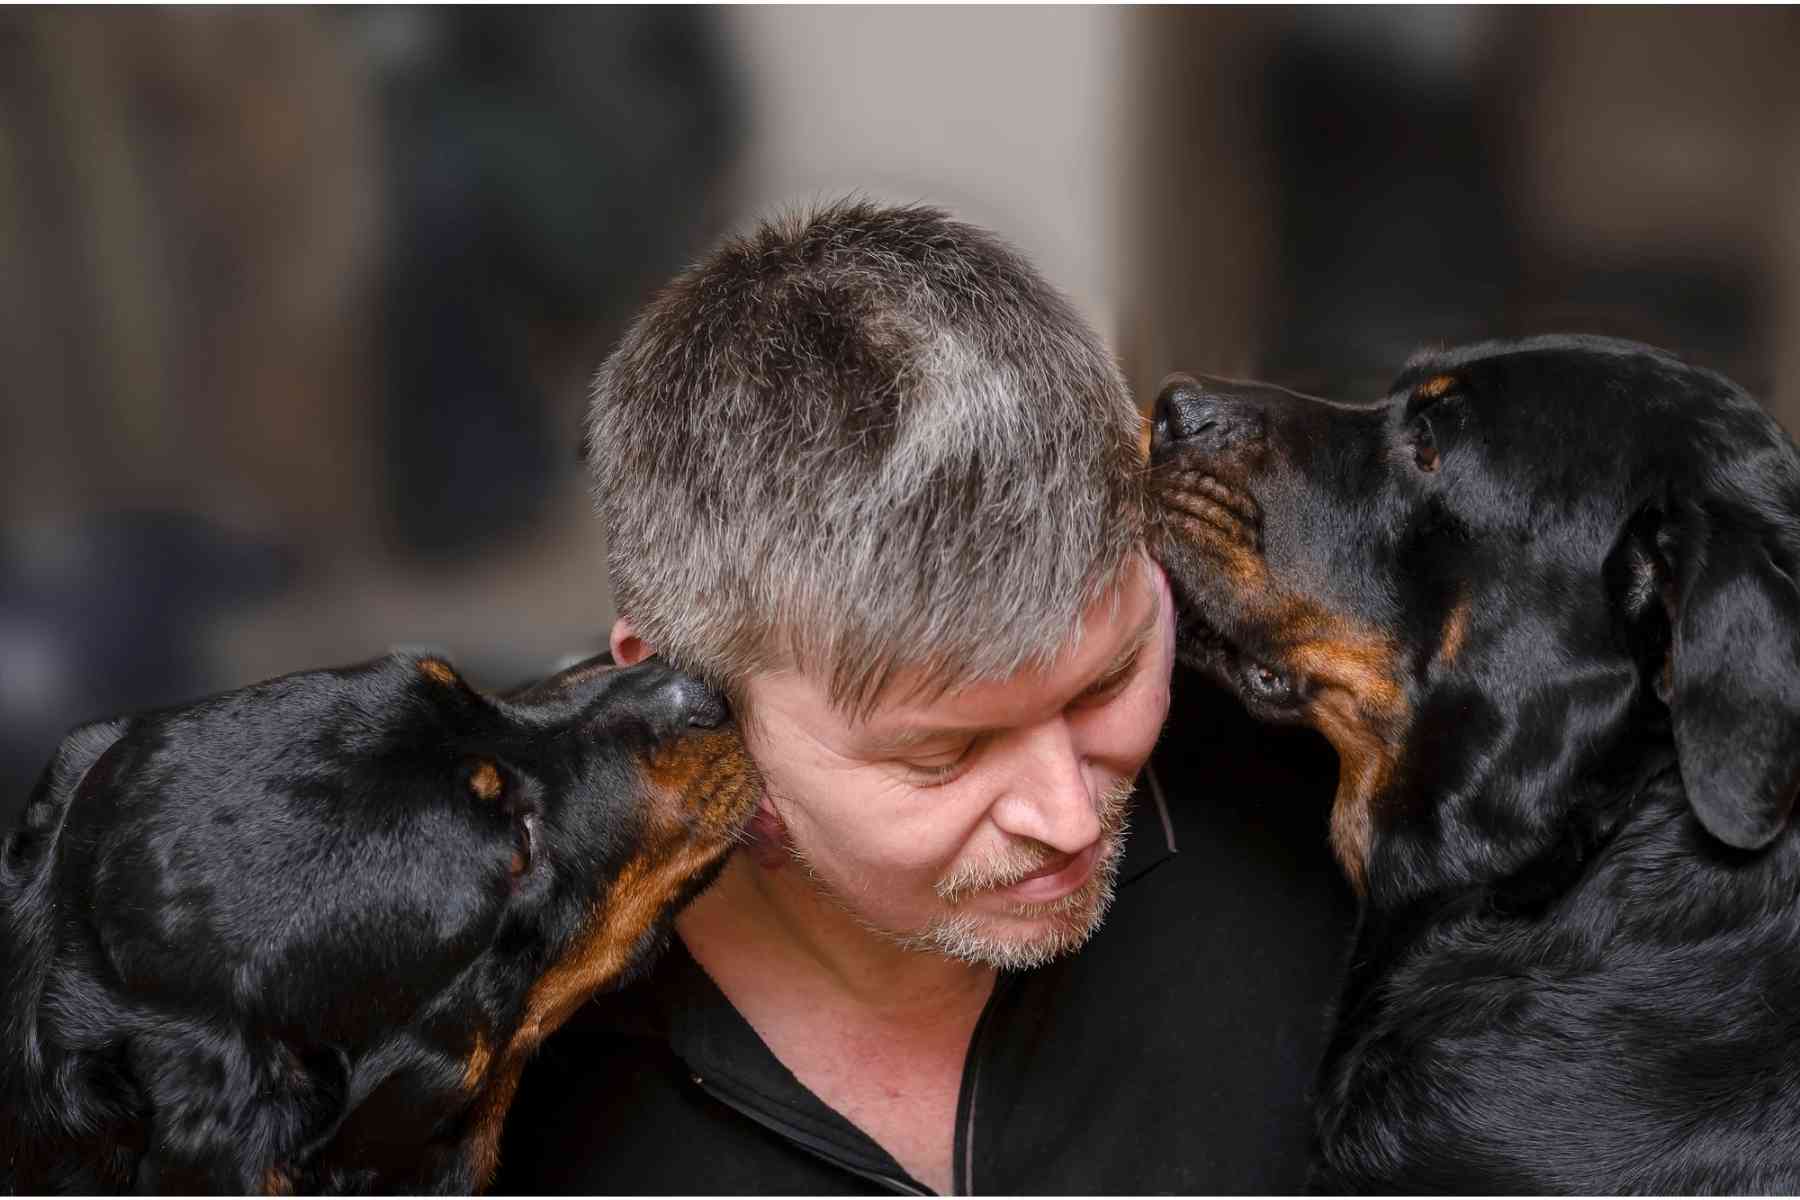 Two Rottweiler dogs gently nibble gray haired man's ears